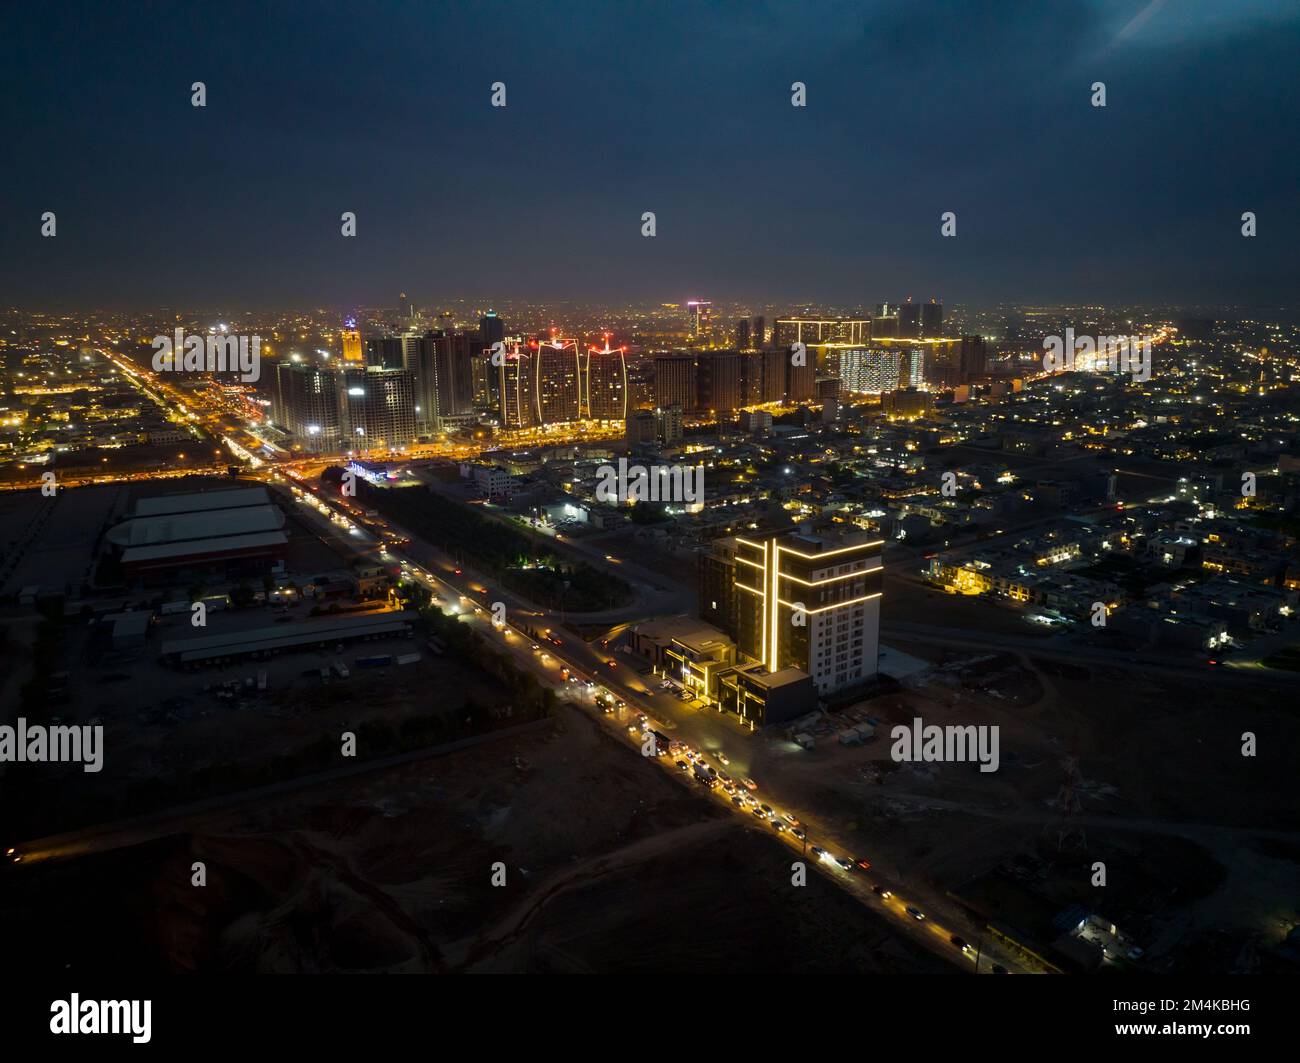 An aerial view of Erbil city with busy streets and illuminated skyscrapers at night, Iraq Stock Photo